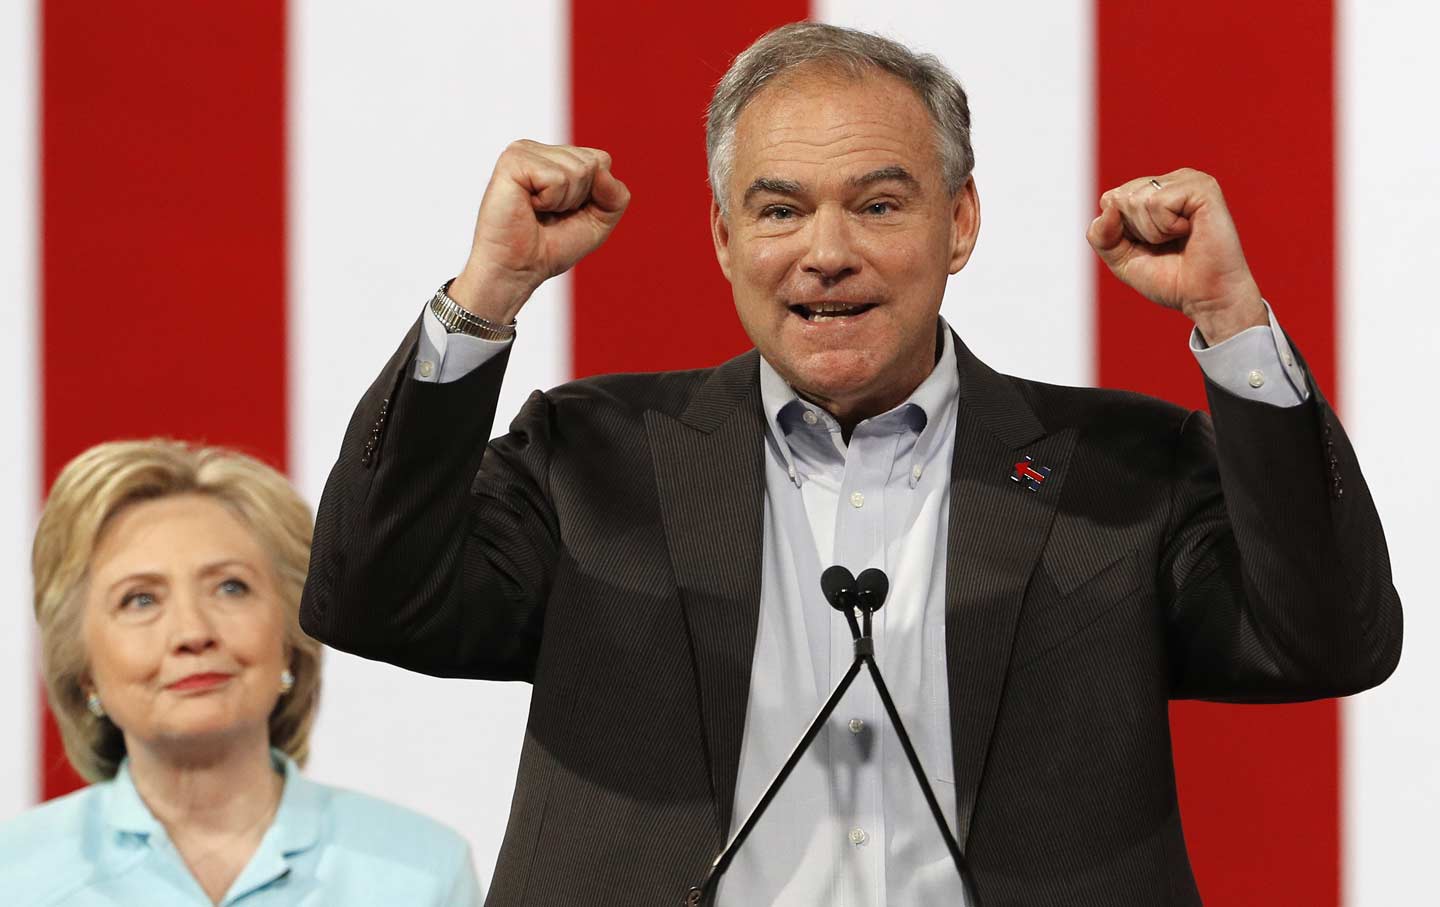 Tim Kaine Has a Mixed Record on Abortion. How Much Will That Matter?